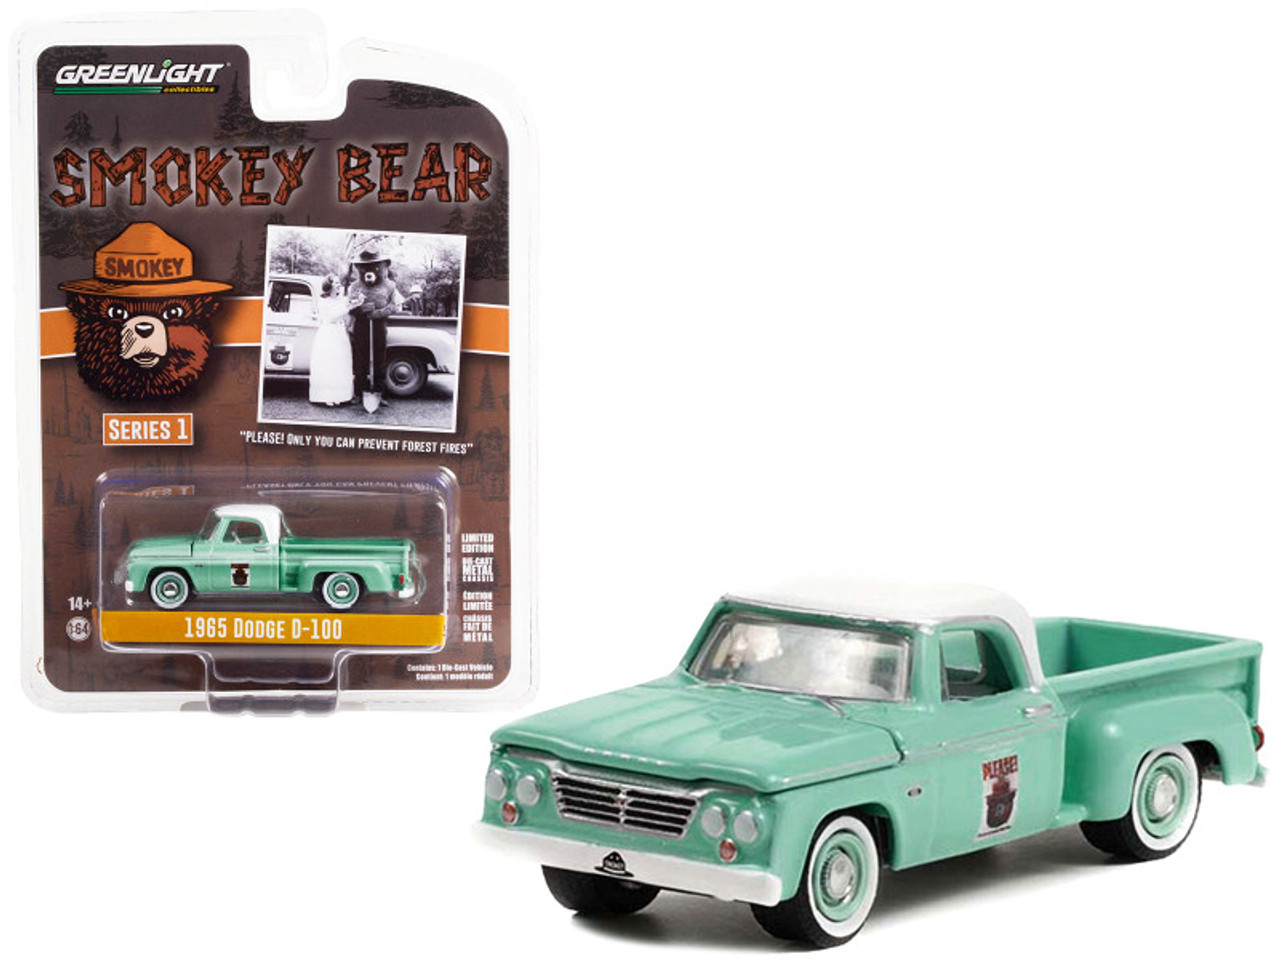 1965 Dodge D-100 Pickup Truck Light Green with White Top "Please! Only You Can Prevent Forest Fires" "Smokey Bear" Series 1 1/64 Diecast Model Car by Greenlight